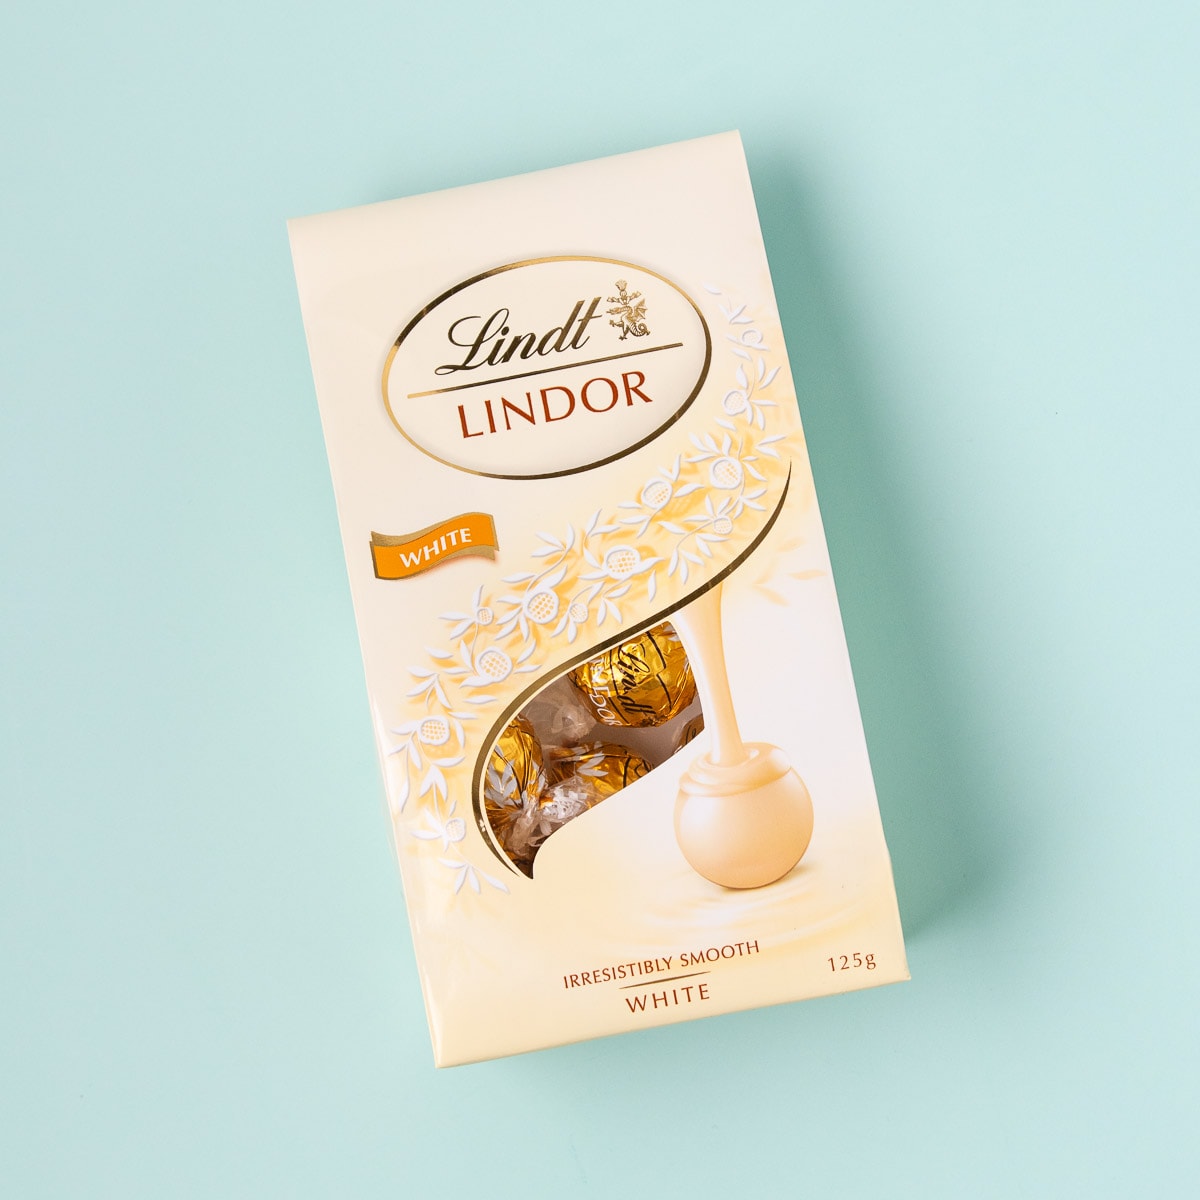 A bag of Lindt white chocolate truffles, on a mint green background.